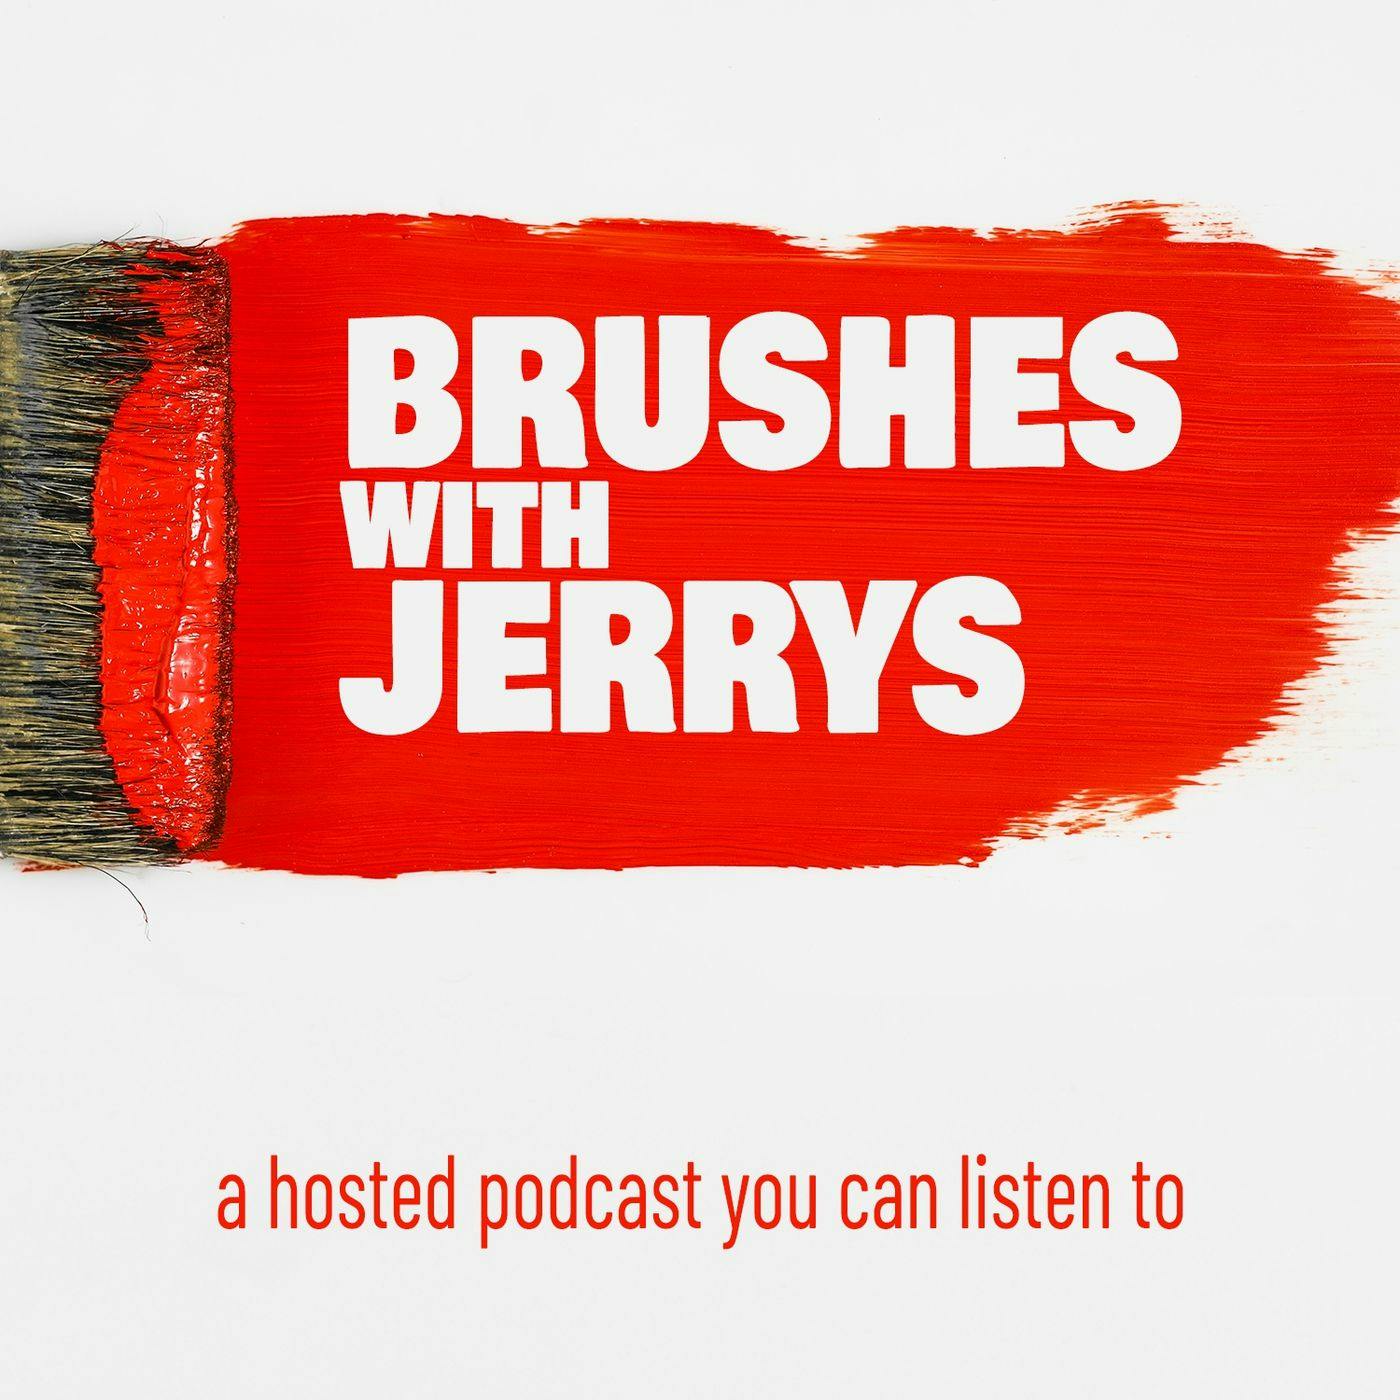 This is episode 3 of Brushes with Jerrys